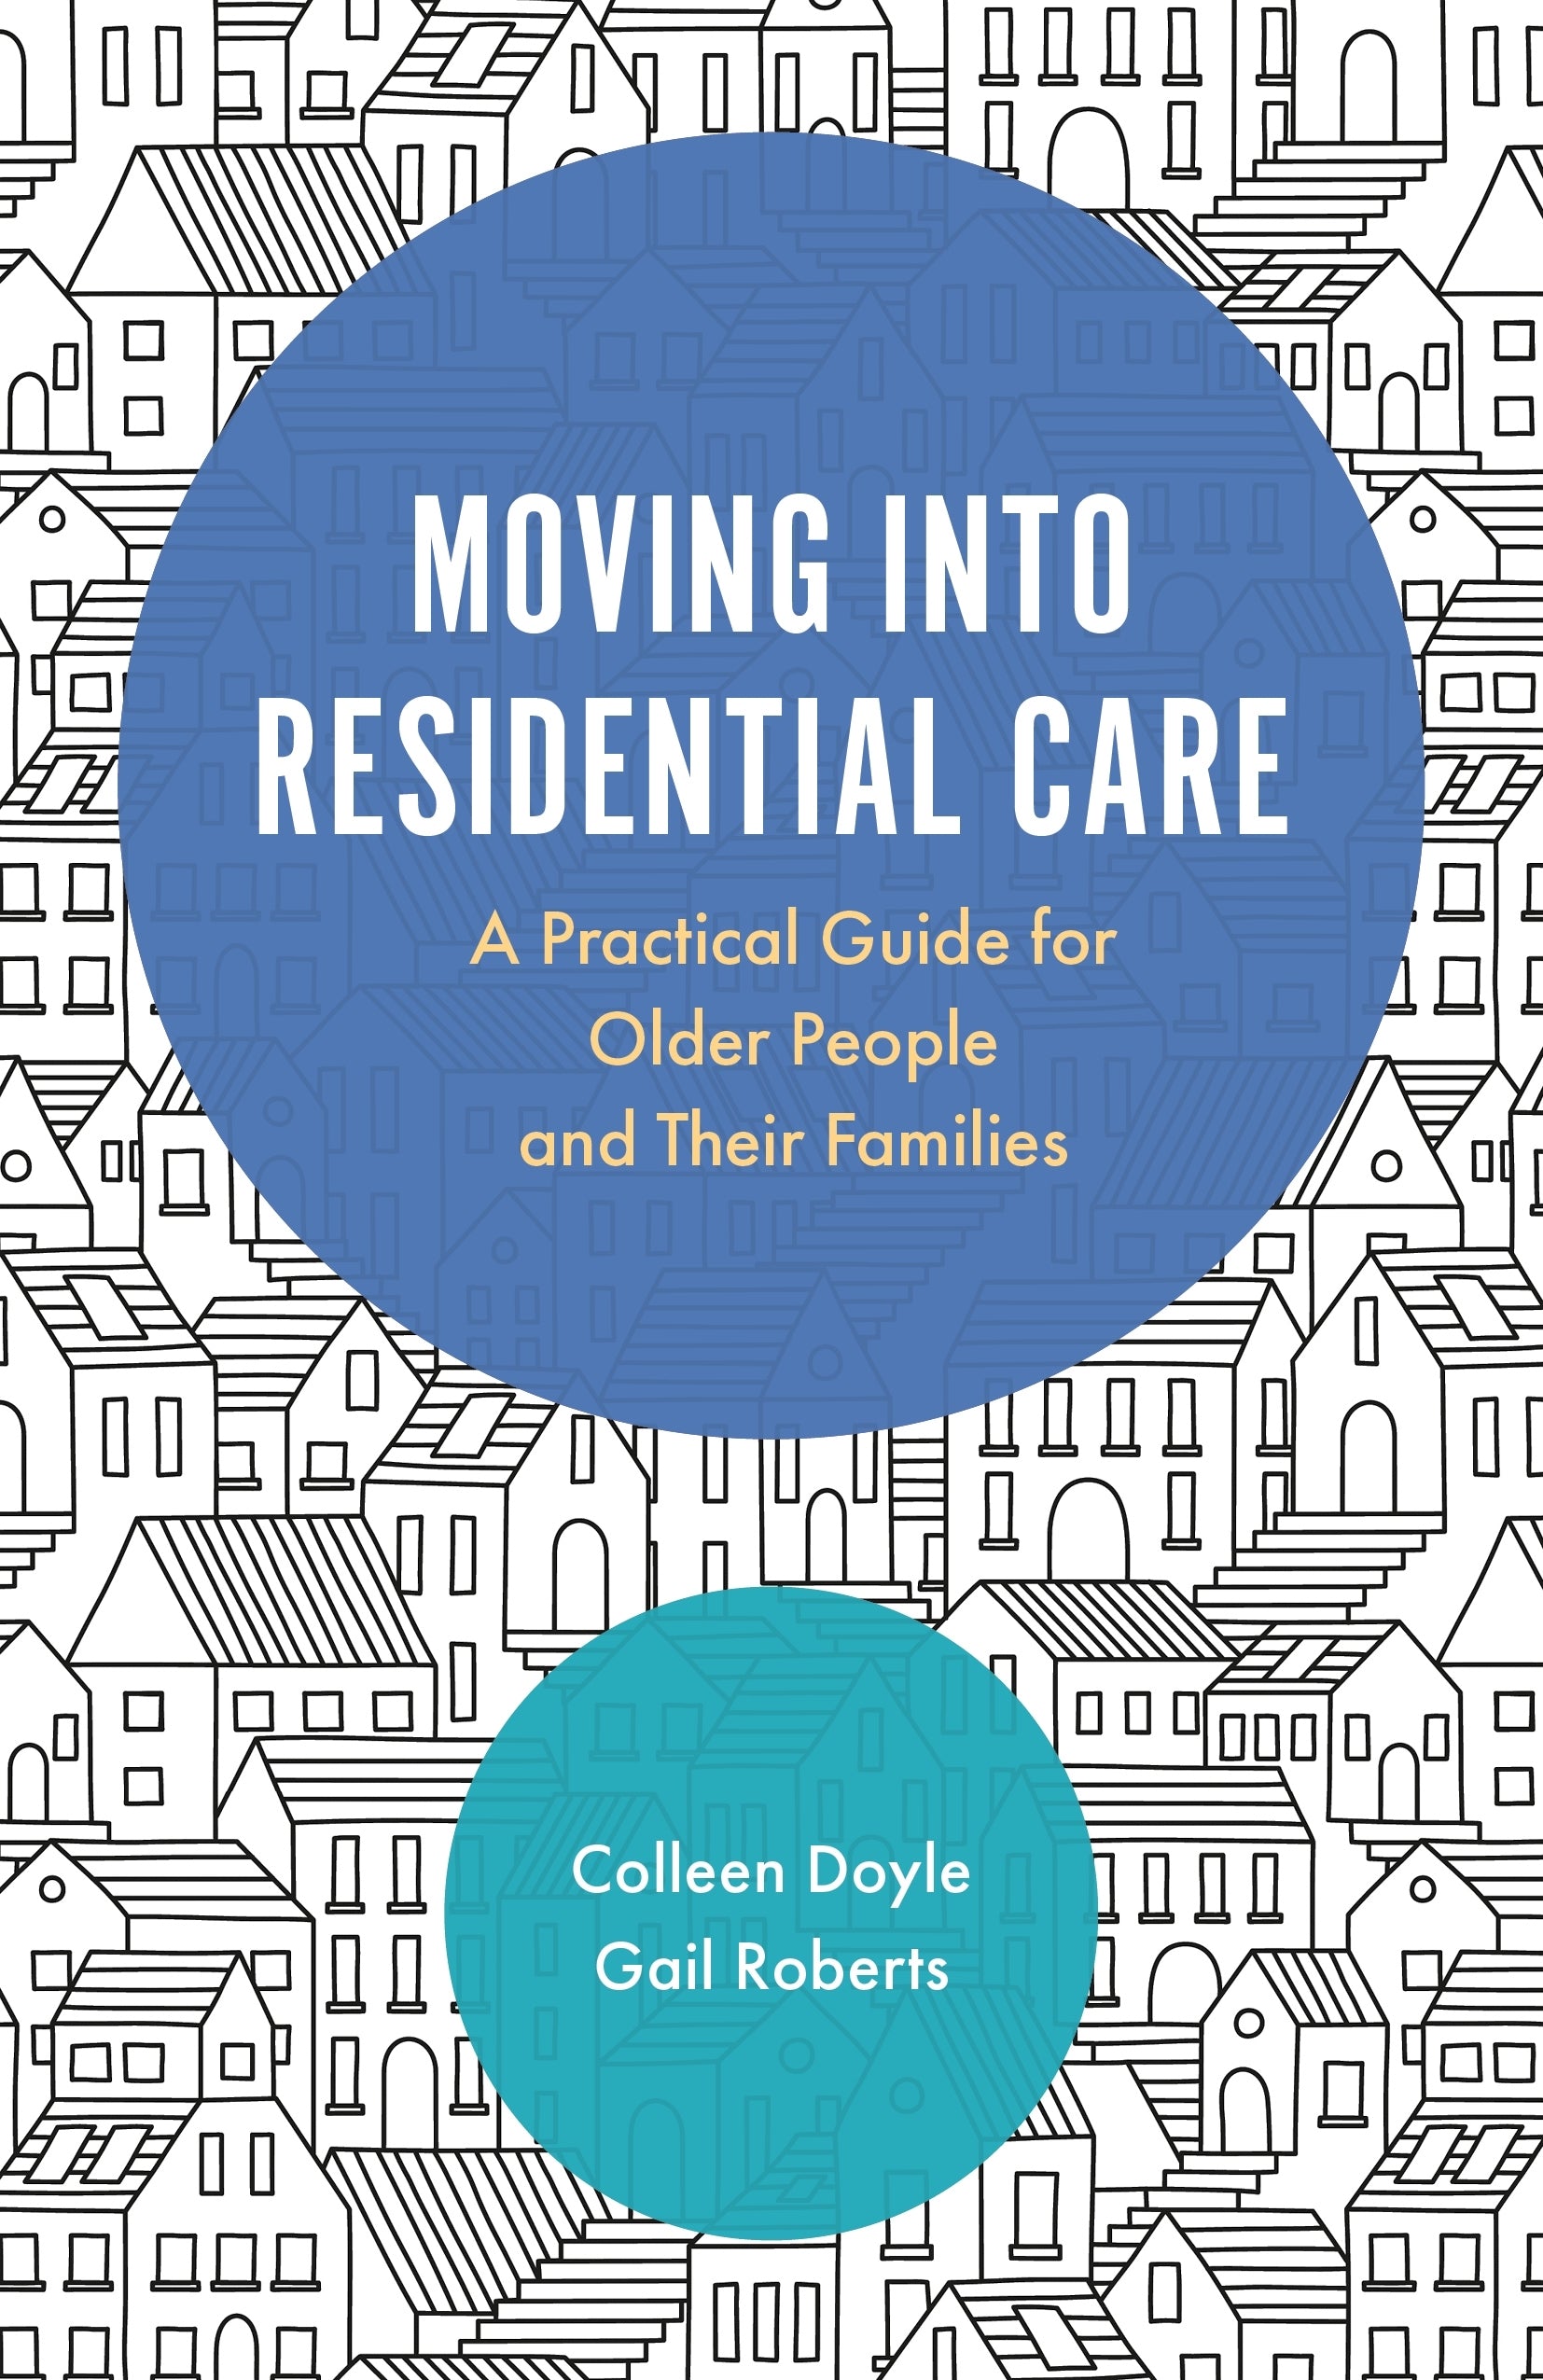 Moving into Residential Care by Colleen Doyle, Gail Roberts